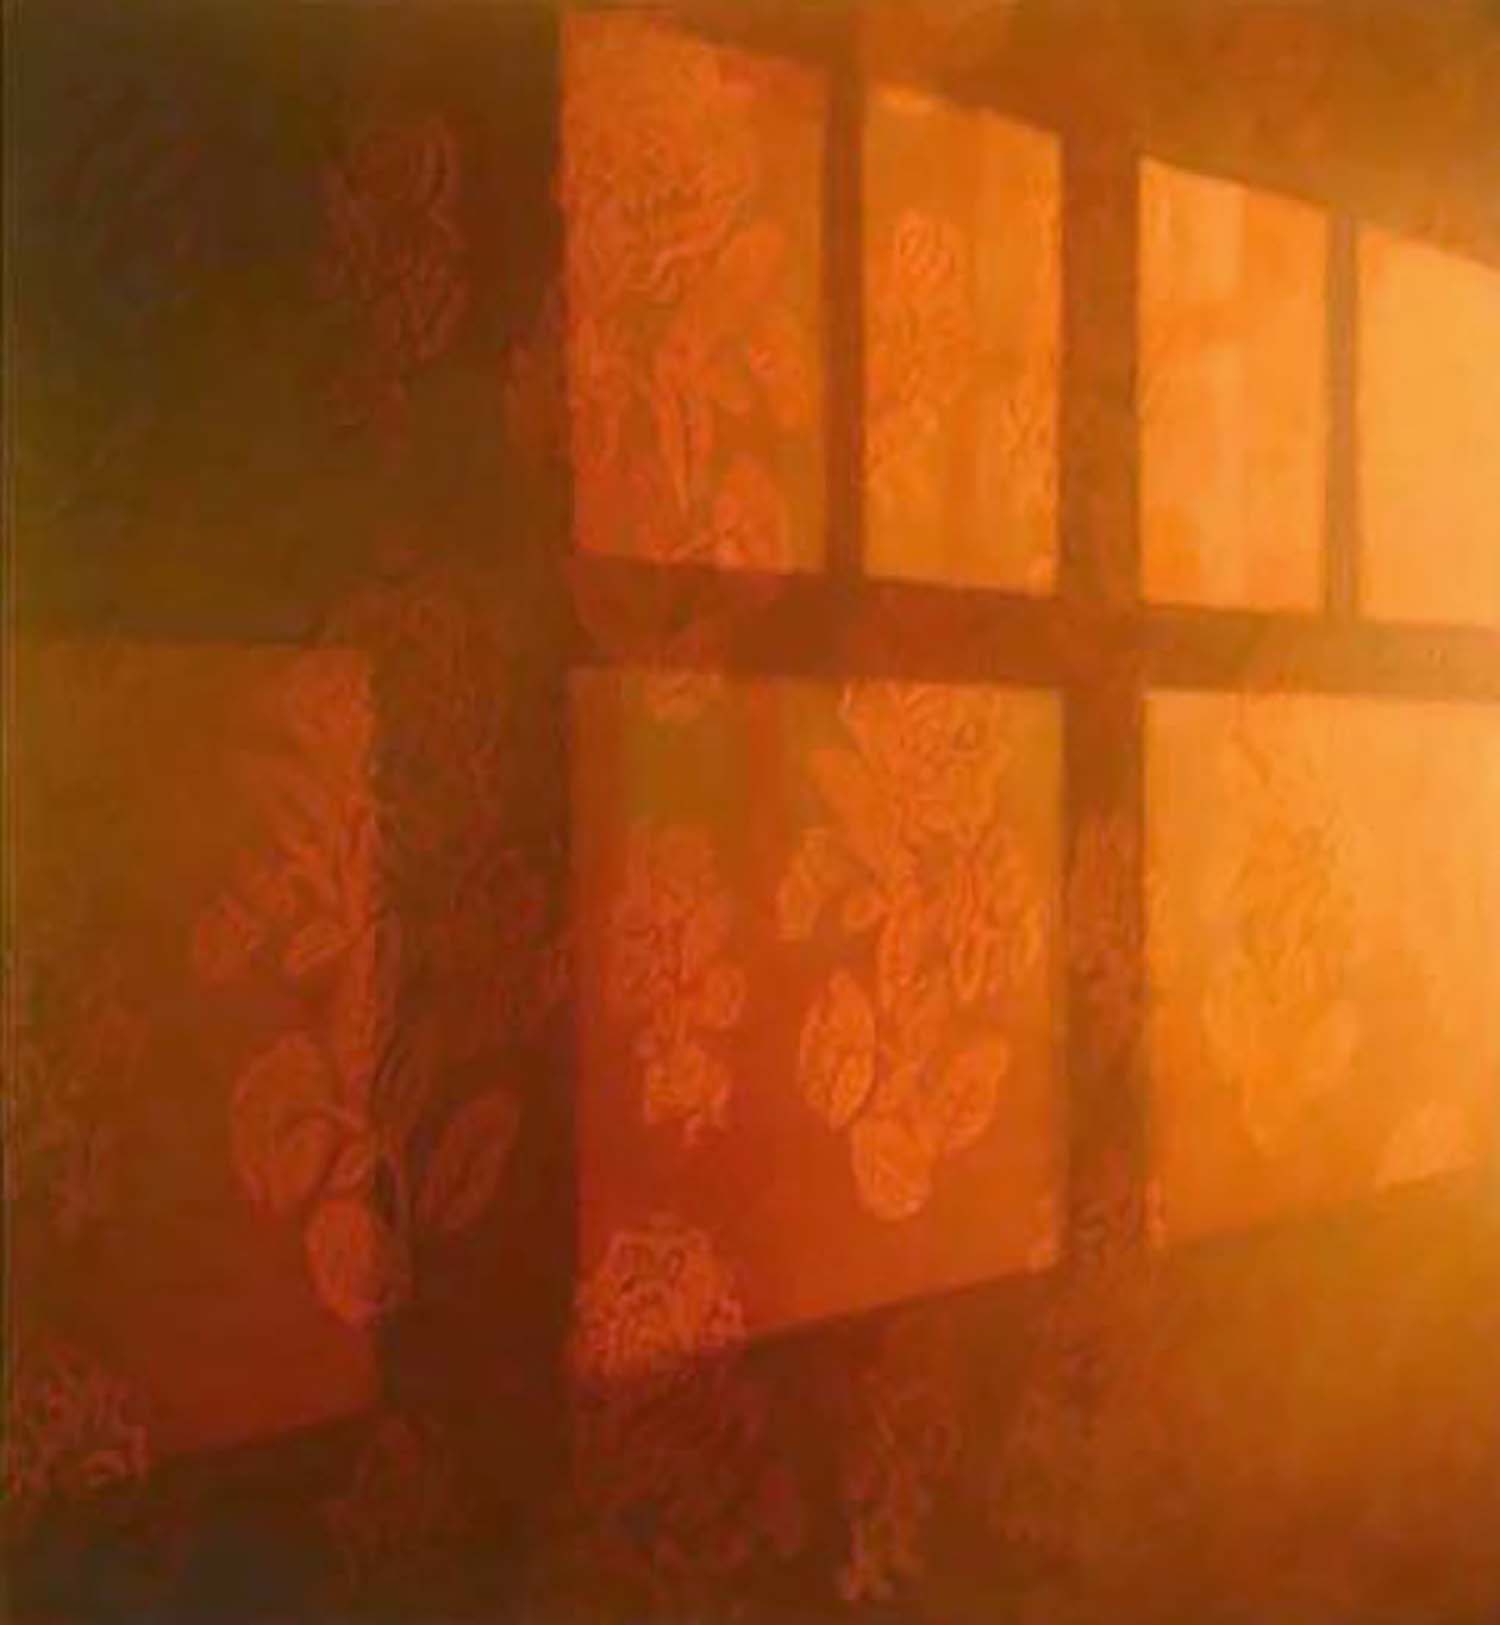   Flowered Wall   2004  Oil on canvas  72 x 66 inches       